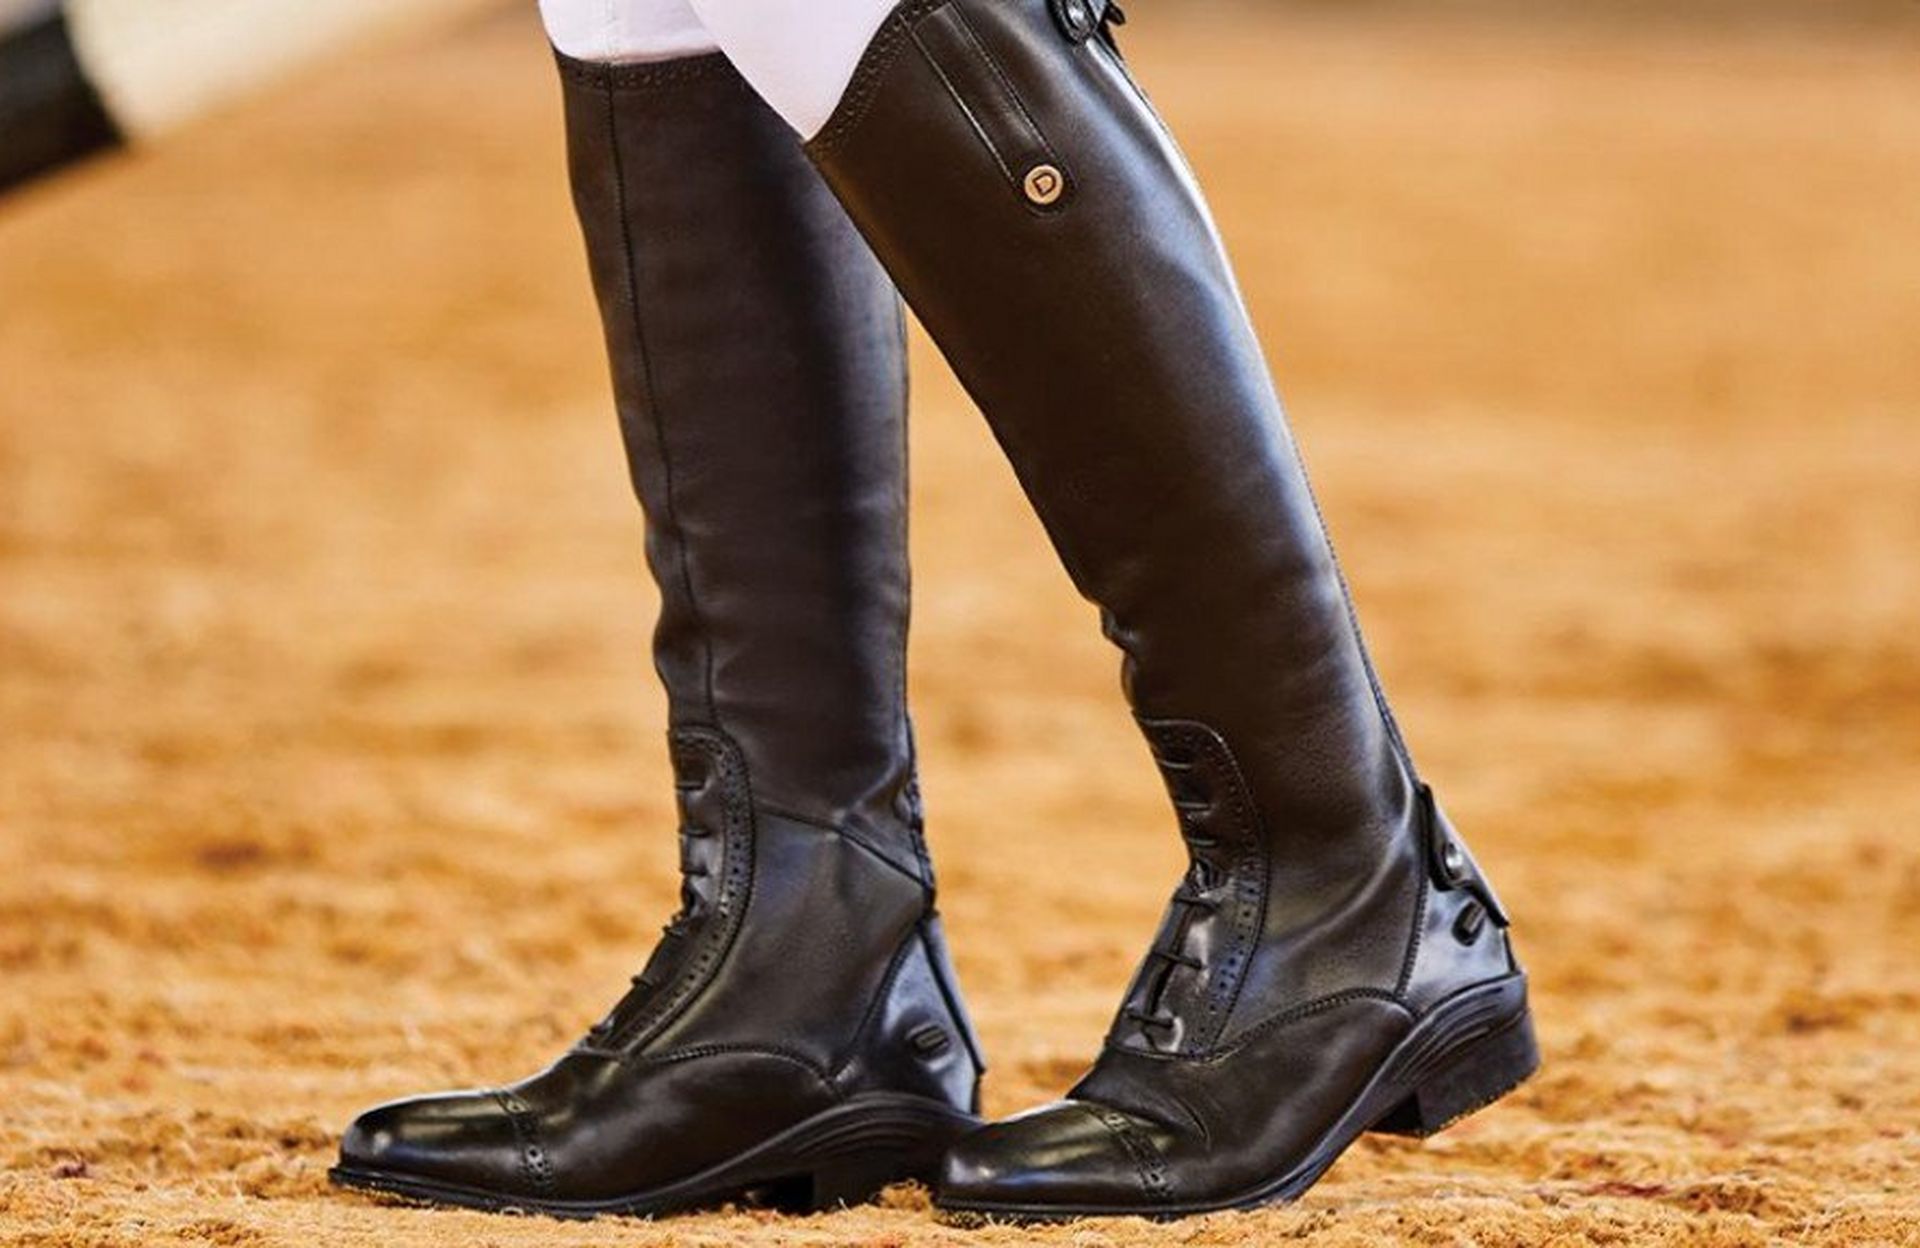 How to choose the right riding pants? - Royal Horse